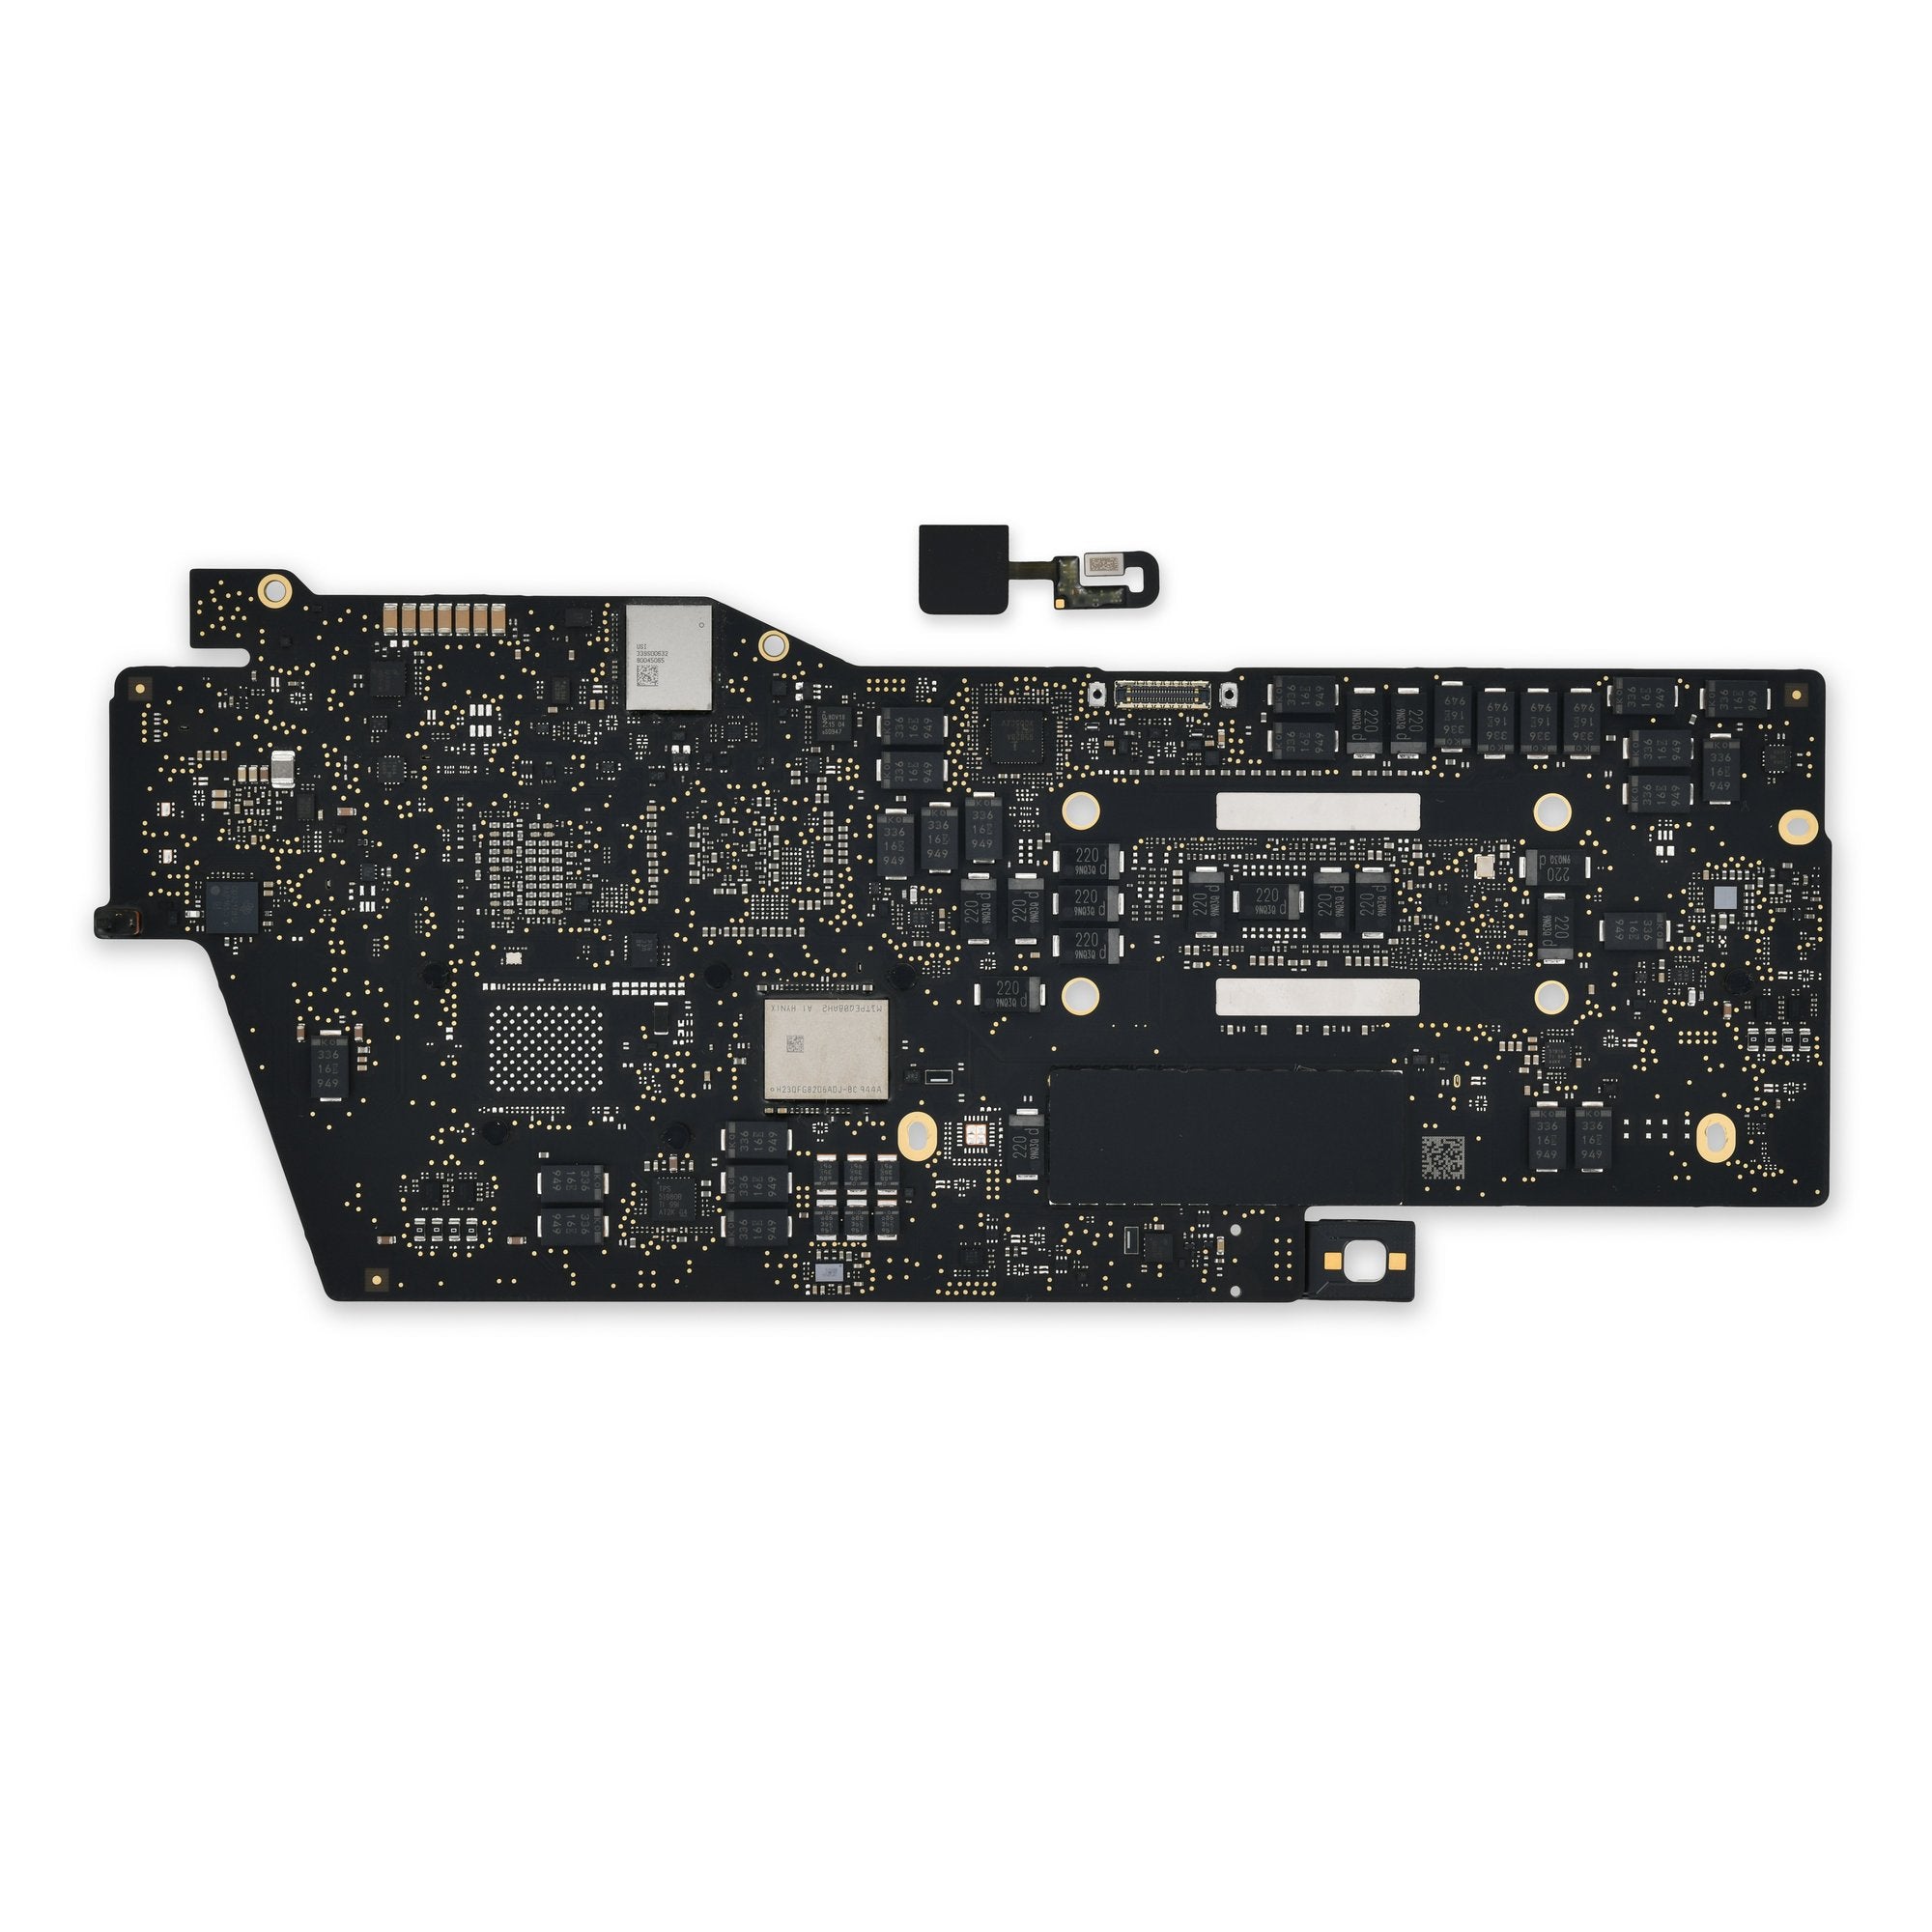 MacBook Pro 13" (A2159, 2019) 1.4 GHz Logic Board with Paired Touch ID Sensor 16 GB RAM 256 GB Used